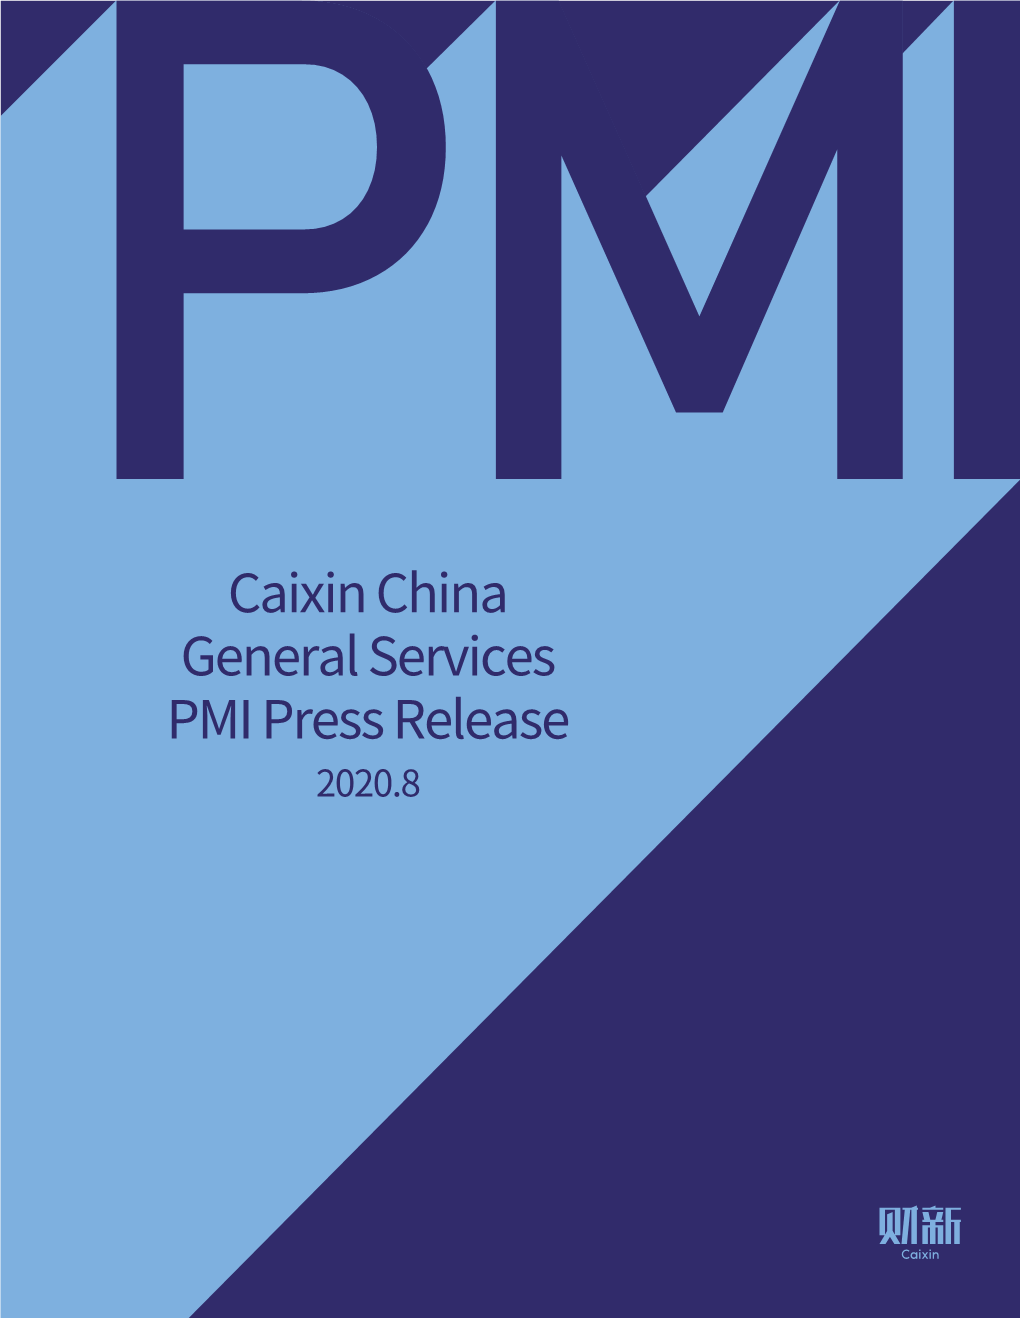 Caixin China General Services PMI Press Release 2020.8 Embargoed Until 0945 CST (0145 UTC) 3 September 2020